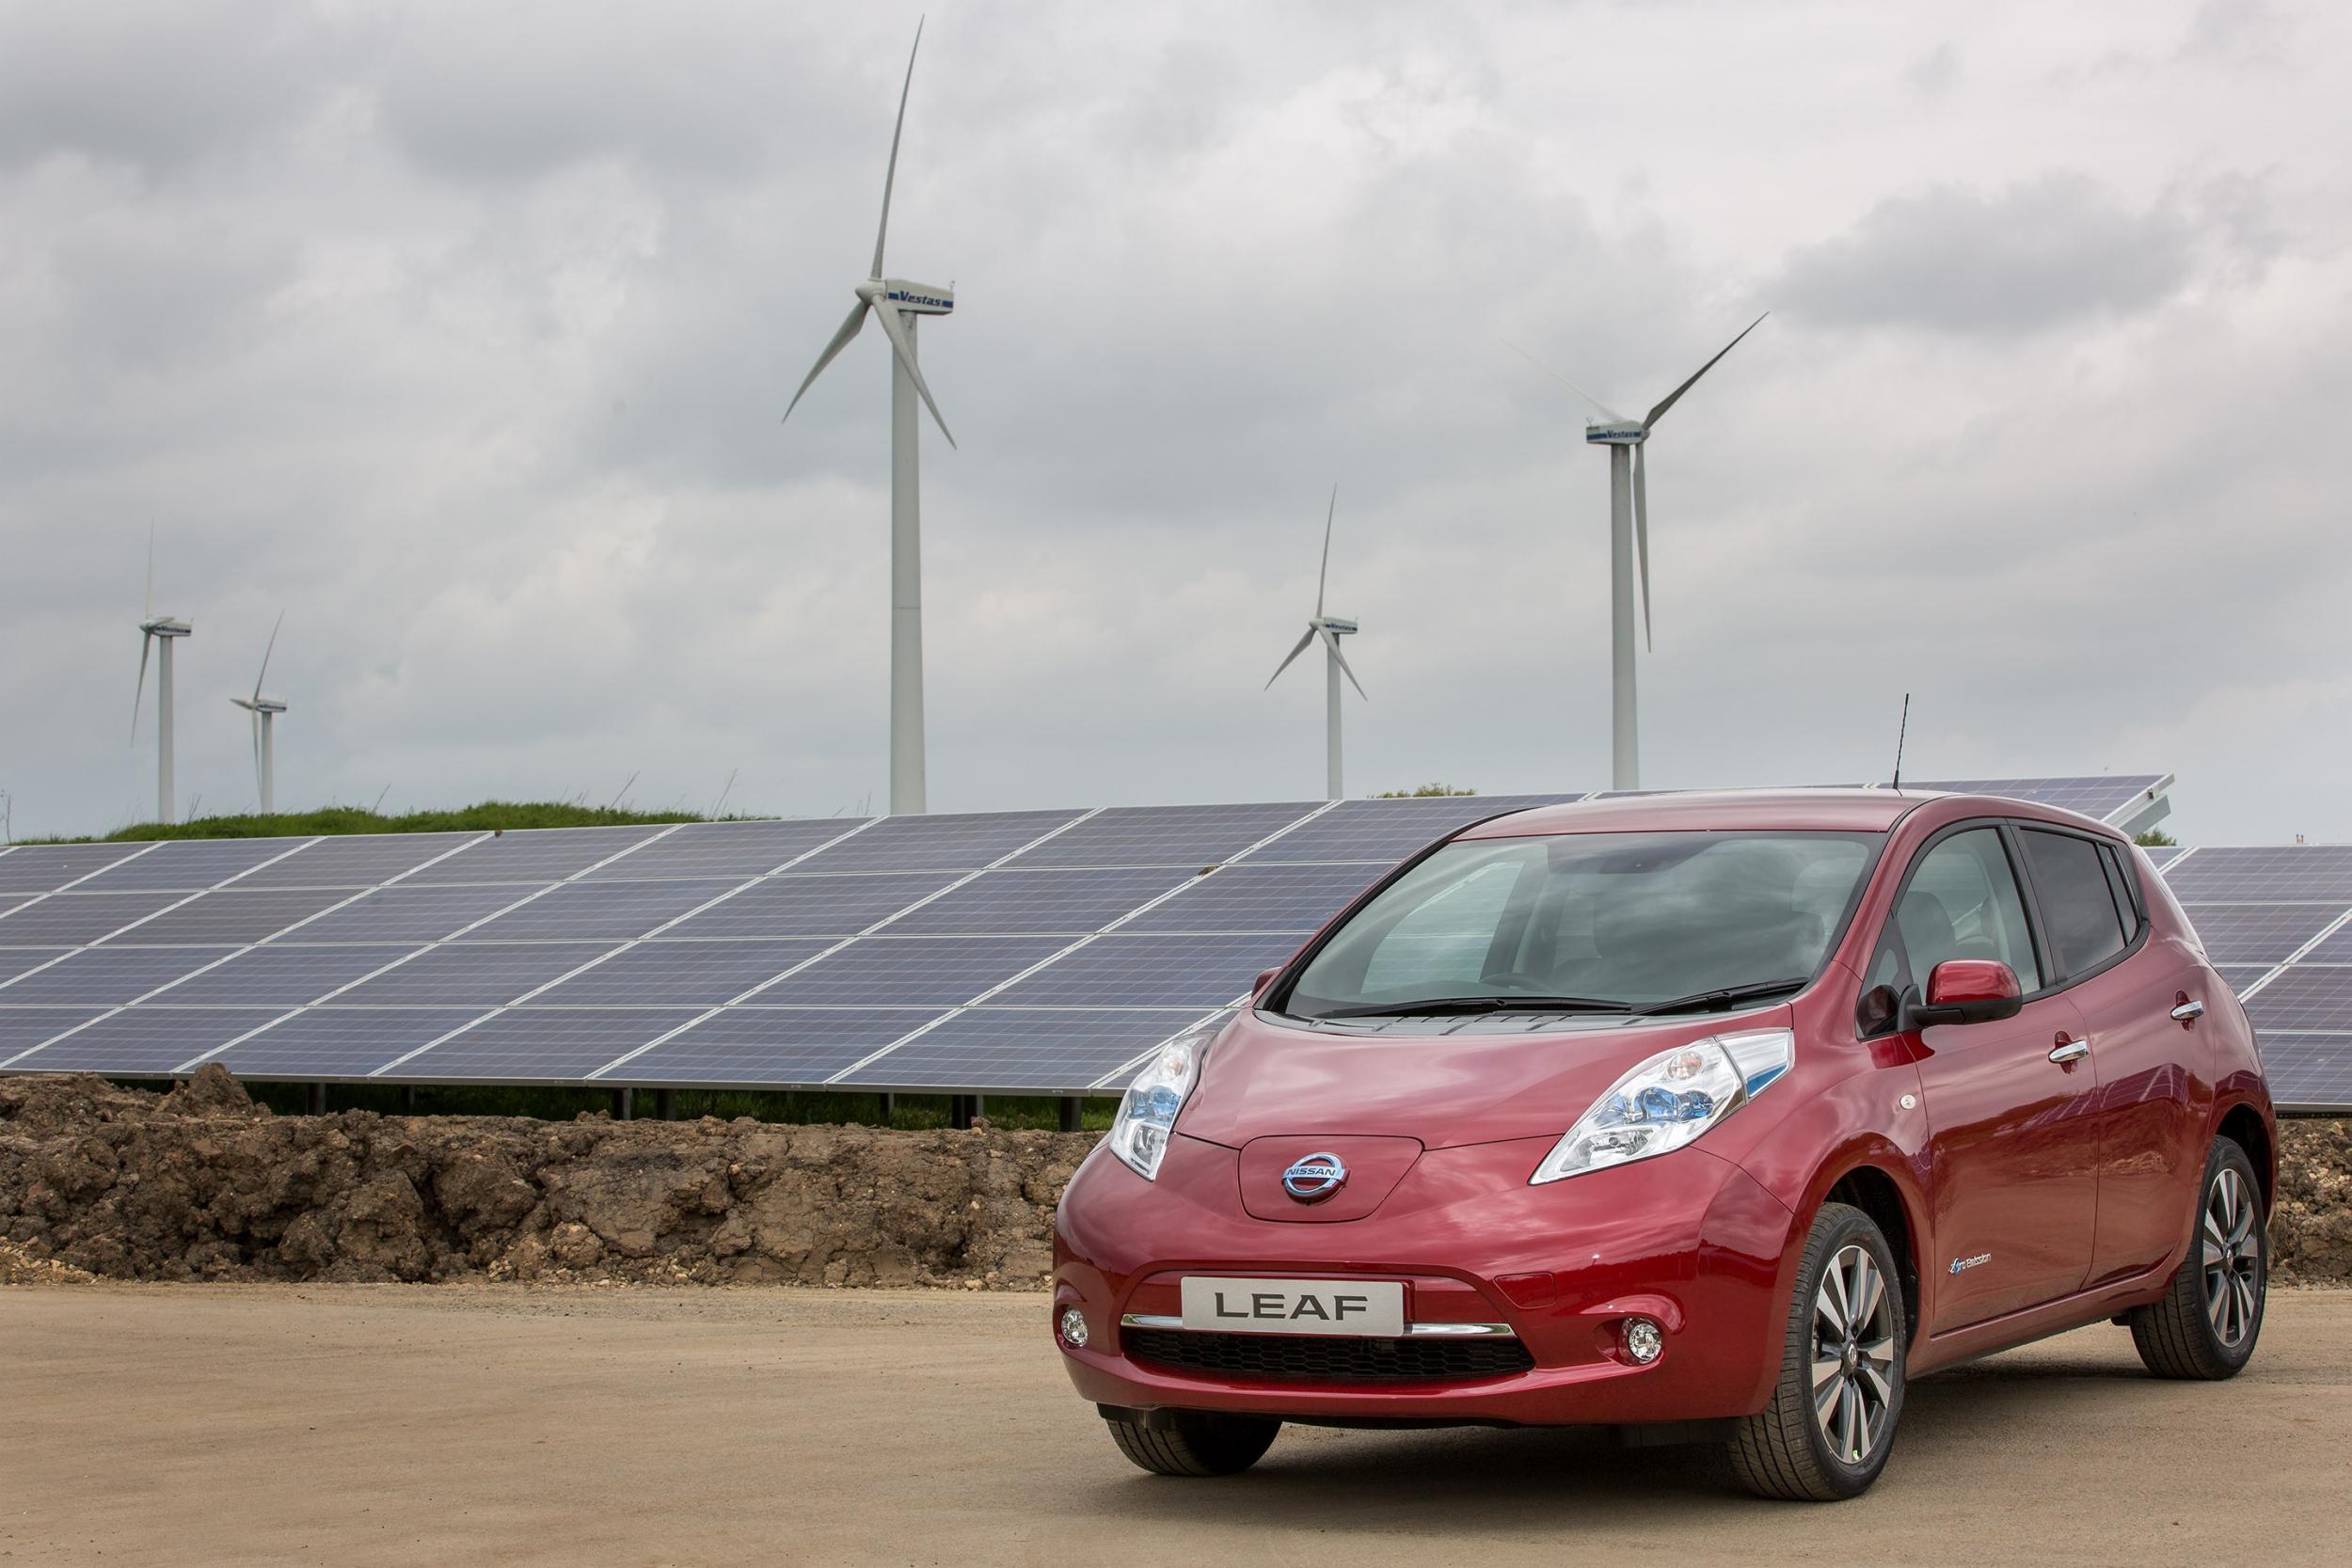 The Nissan Leaf is also manufactured in Sunderland